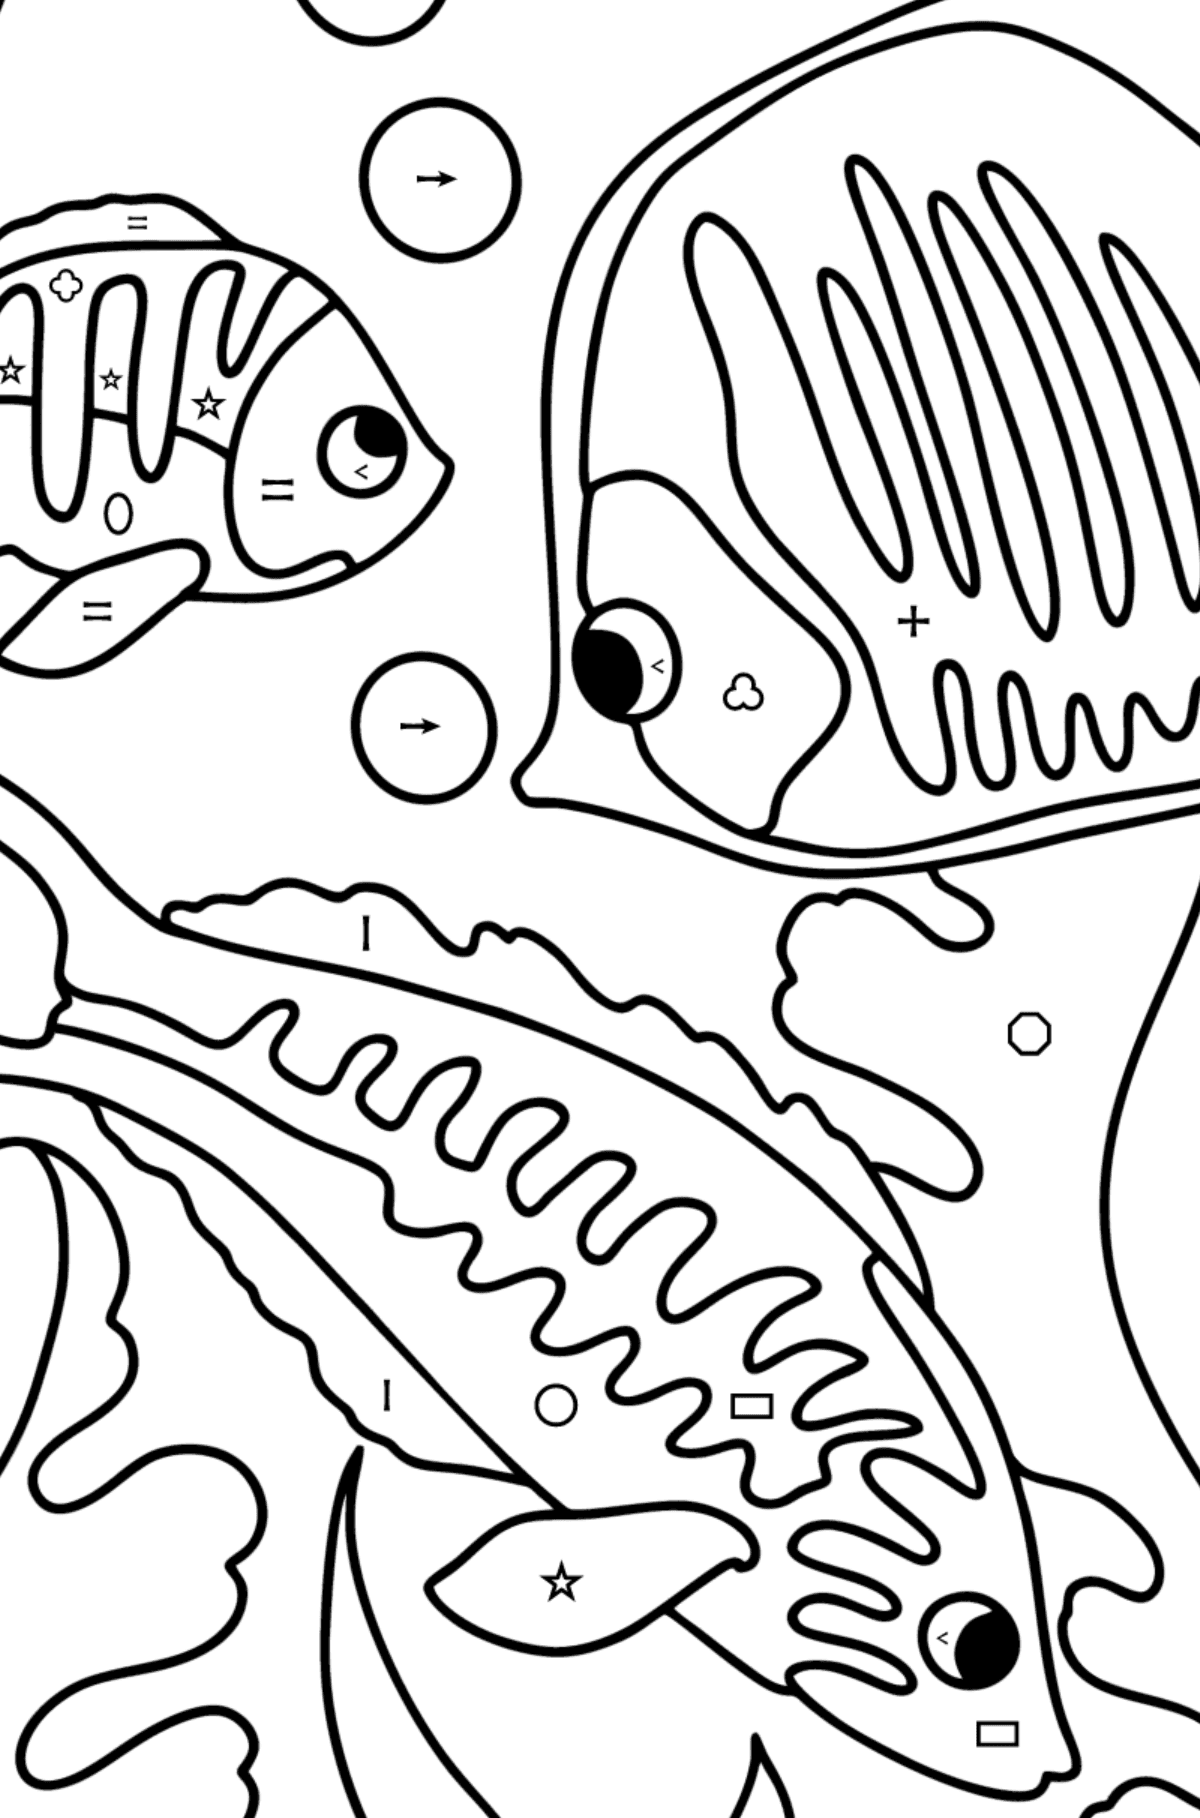 Fish in the sea coloring page - Coloring by Symbols and Geometric Shapes for Kids